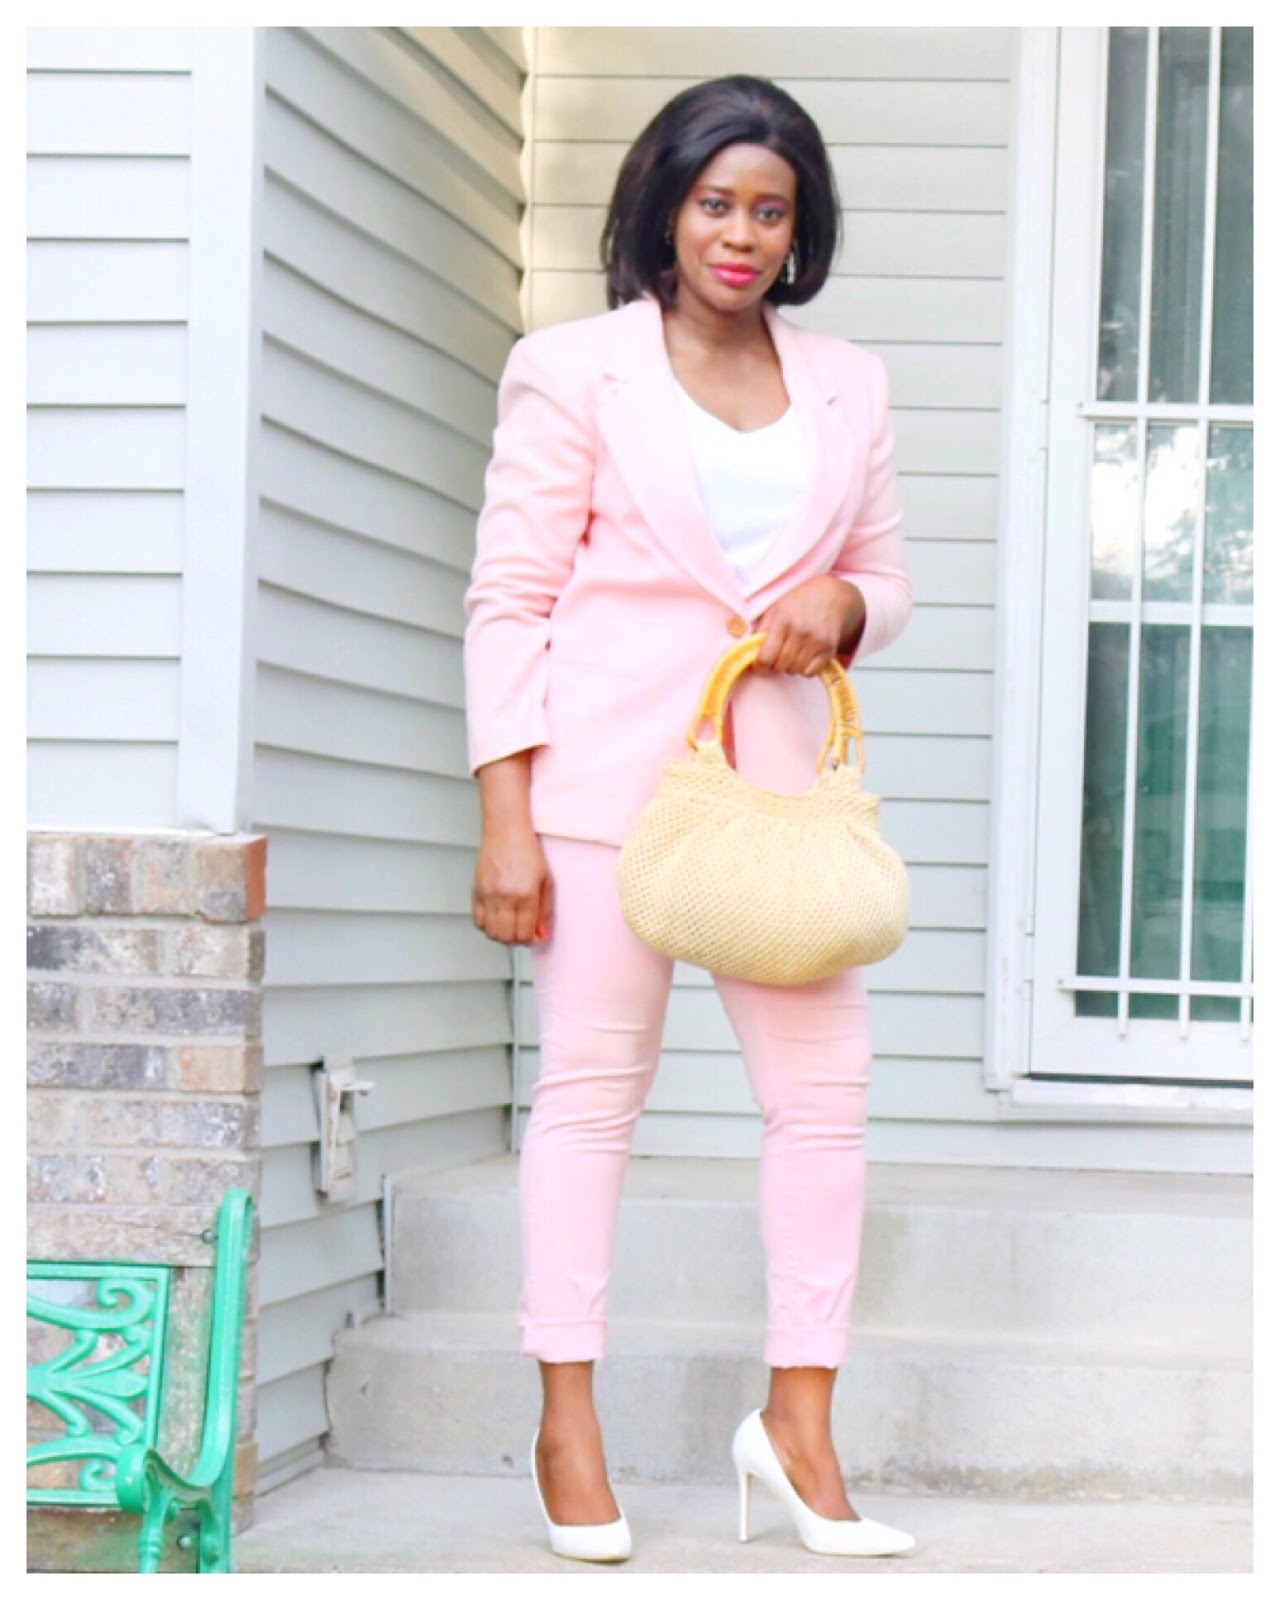 Beauty's Fashion Zone: Keeping it simple and bright: Pink pant suit ...